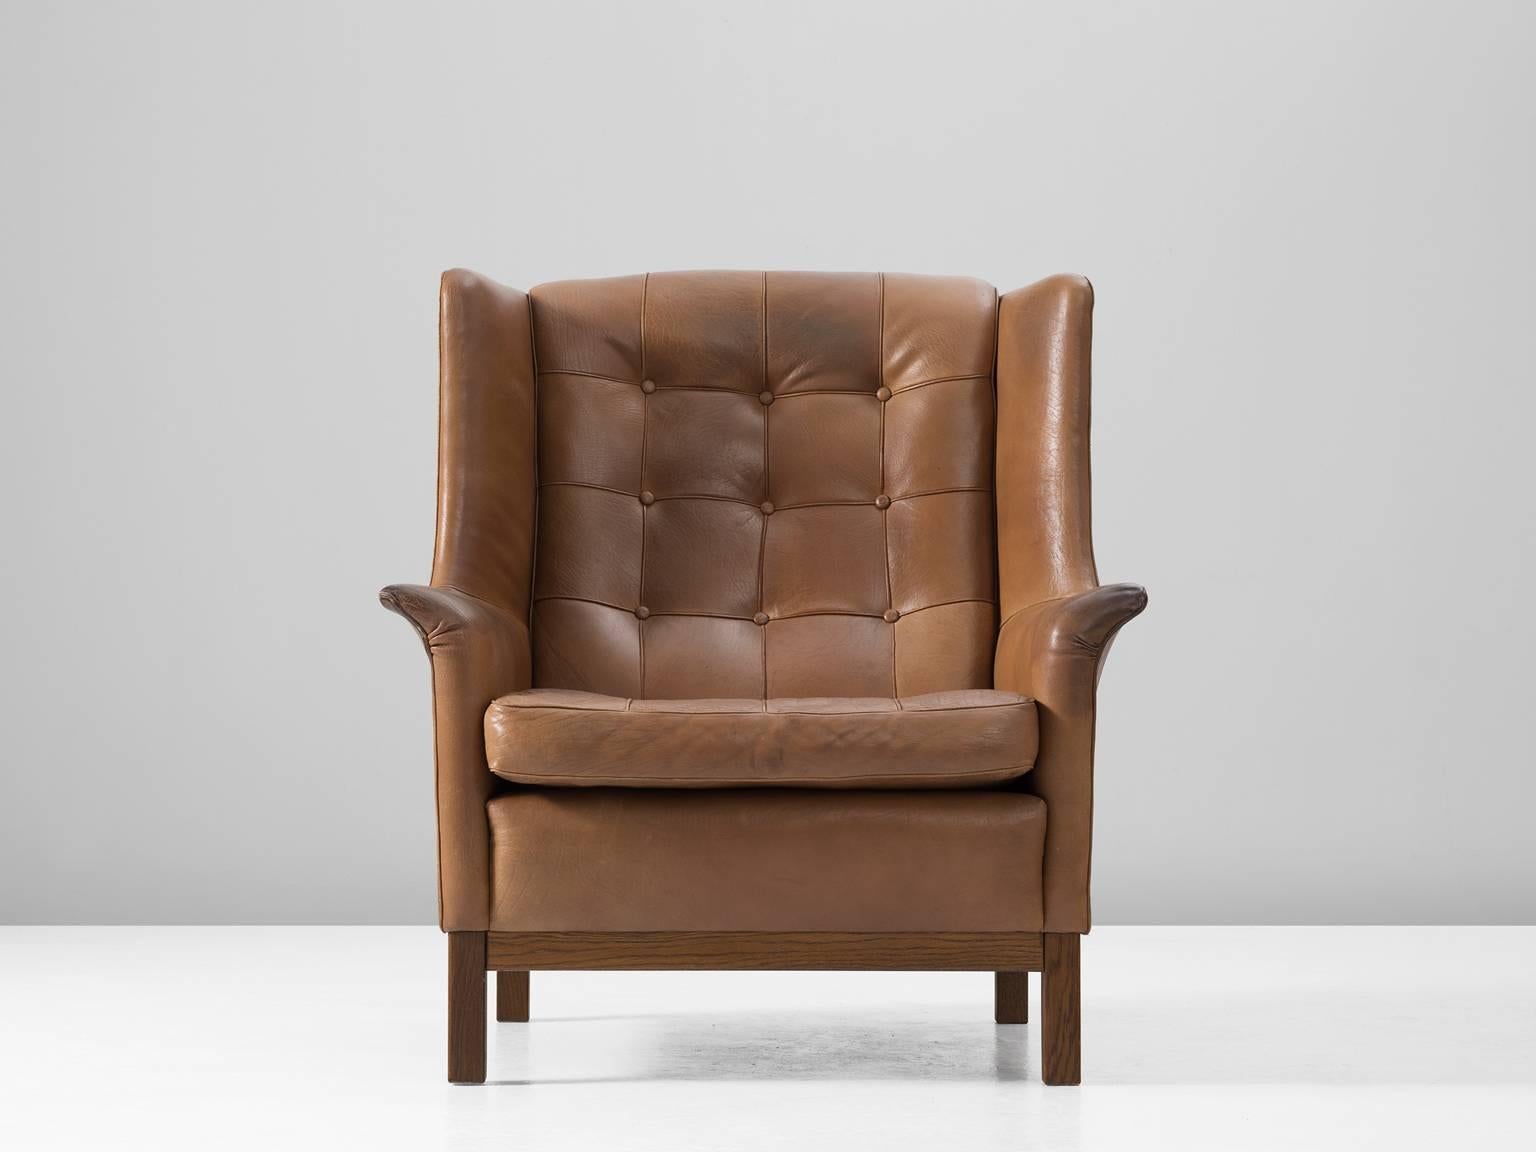 High back chair, in leather and wood, by Arne Norell, Sweden, 1960s. 

Wonderful comfortable cognac buffalo leather easy chair by Swedish designer Arne Norell. This lounge chair comes with a very high standard of comfort, as where Norell is known